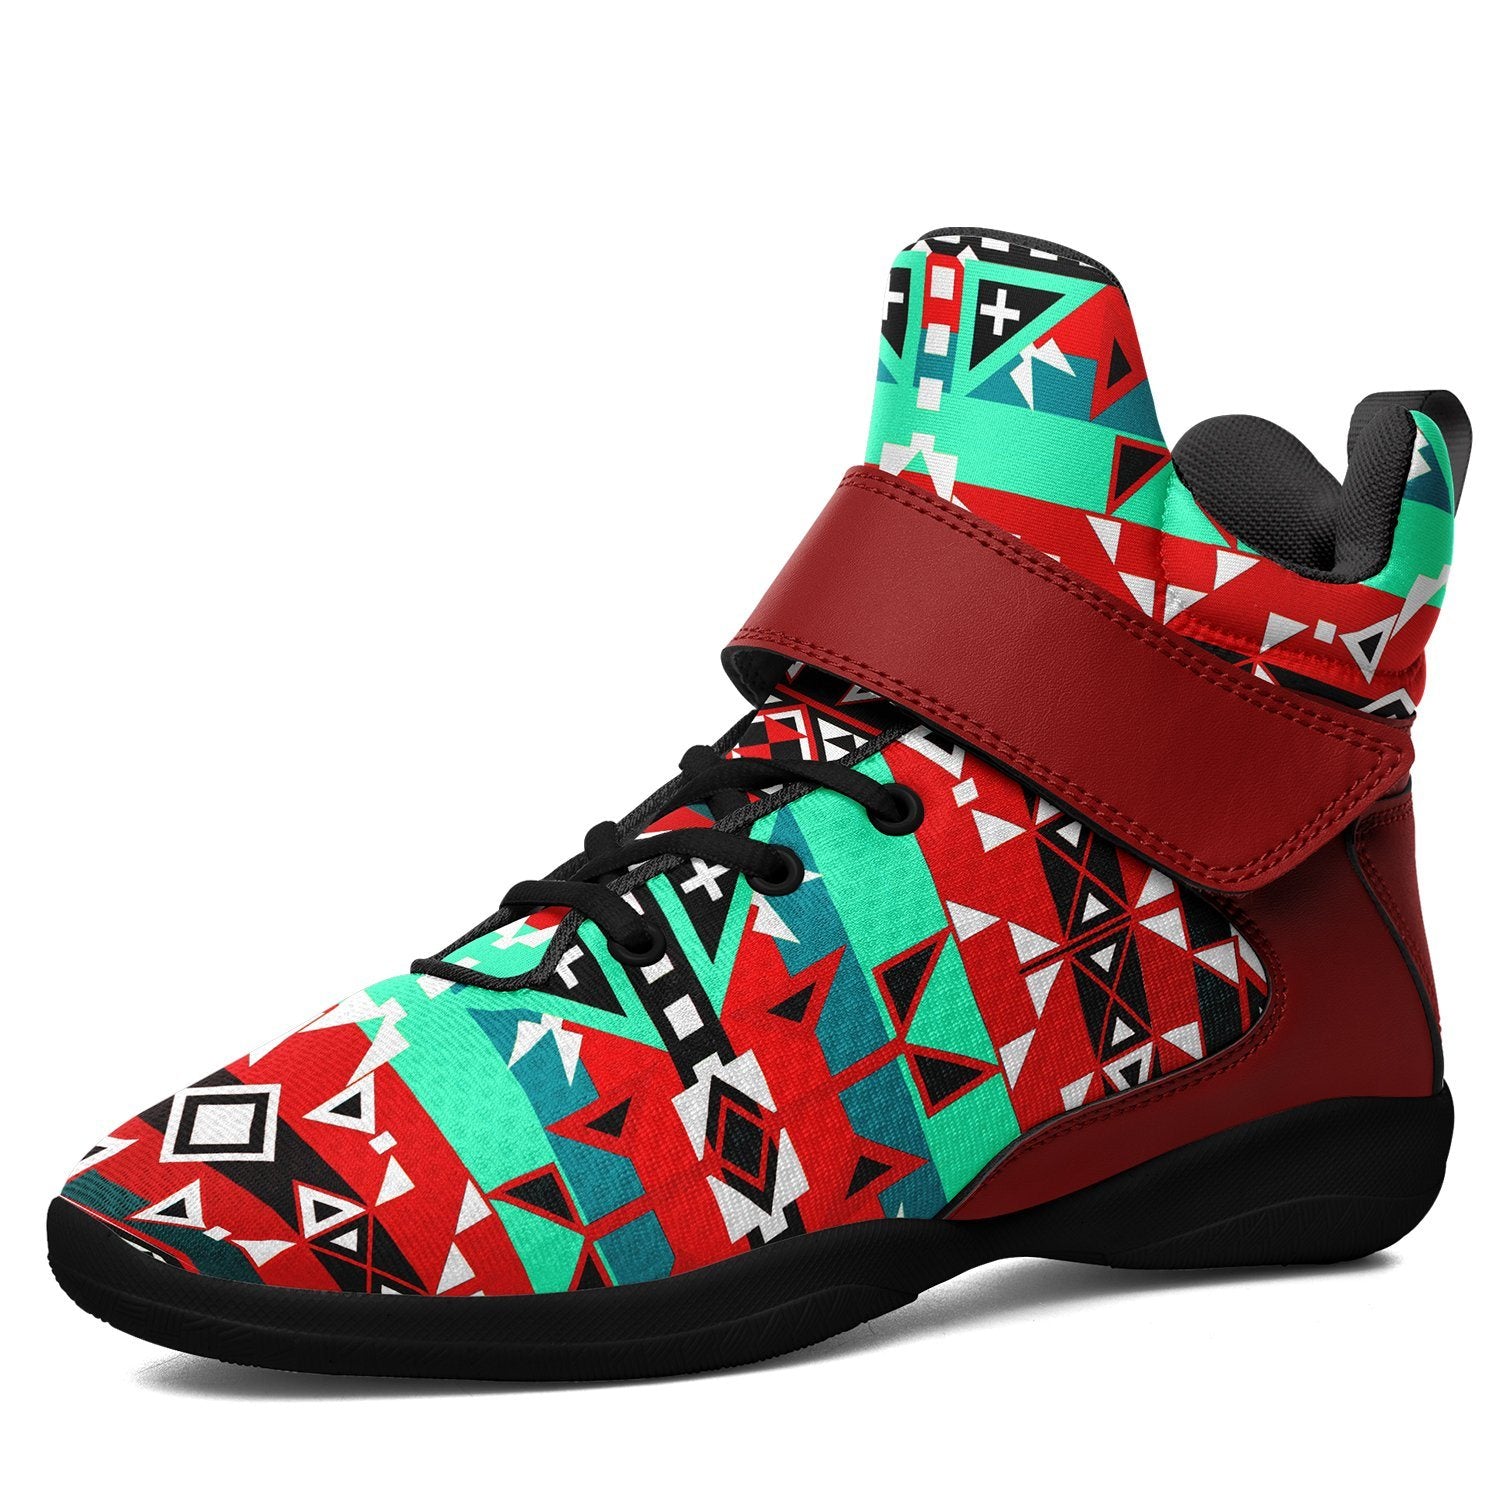 After the Southwest Rain Ipottaa Basketball / Sport High Top Shoes 49 Dzine US Women 4.5 / US Youth 3.5 / EUR 35 Black Sole with Dark Red Strap 